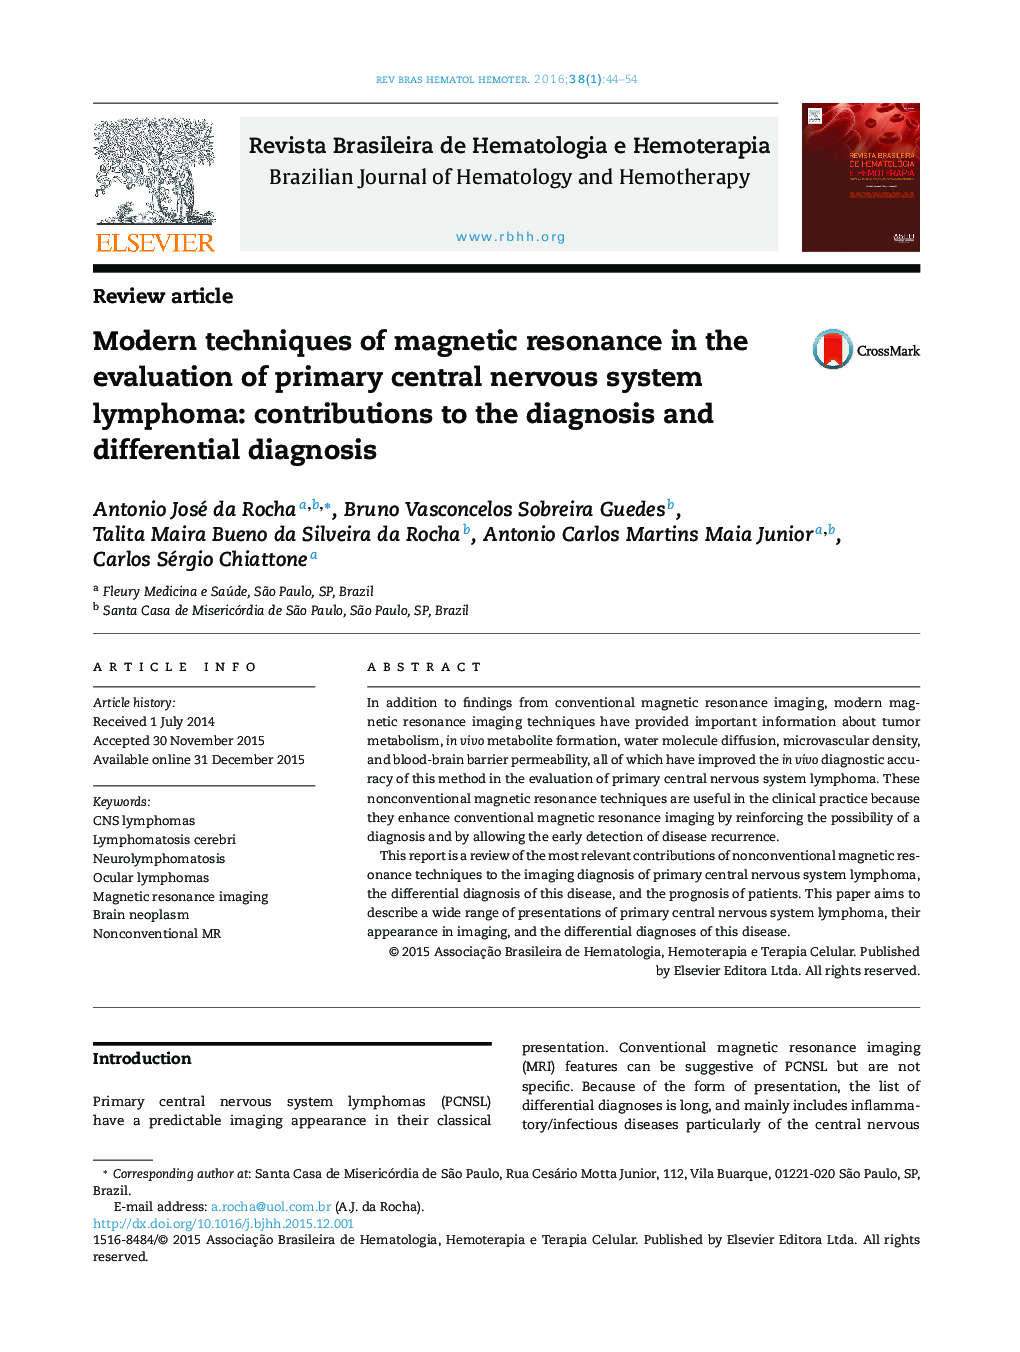 Modern techniques of magnetic resonance in the evaluation of primary central nervous system lymphoma: contributions to the diagnosis and differential diagnosis